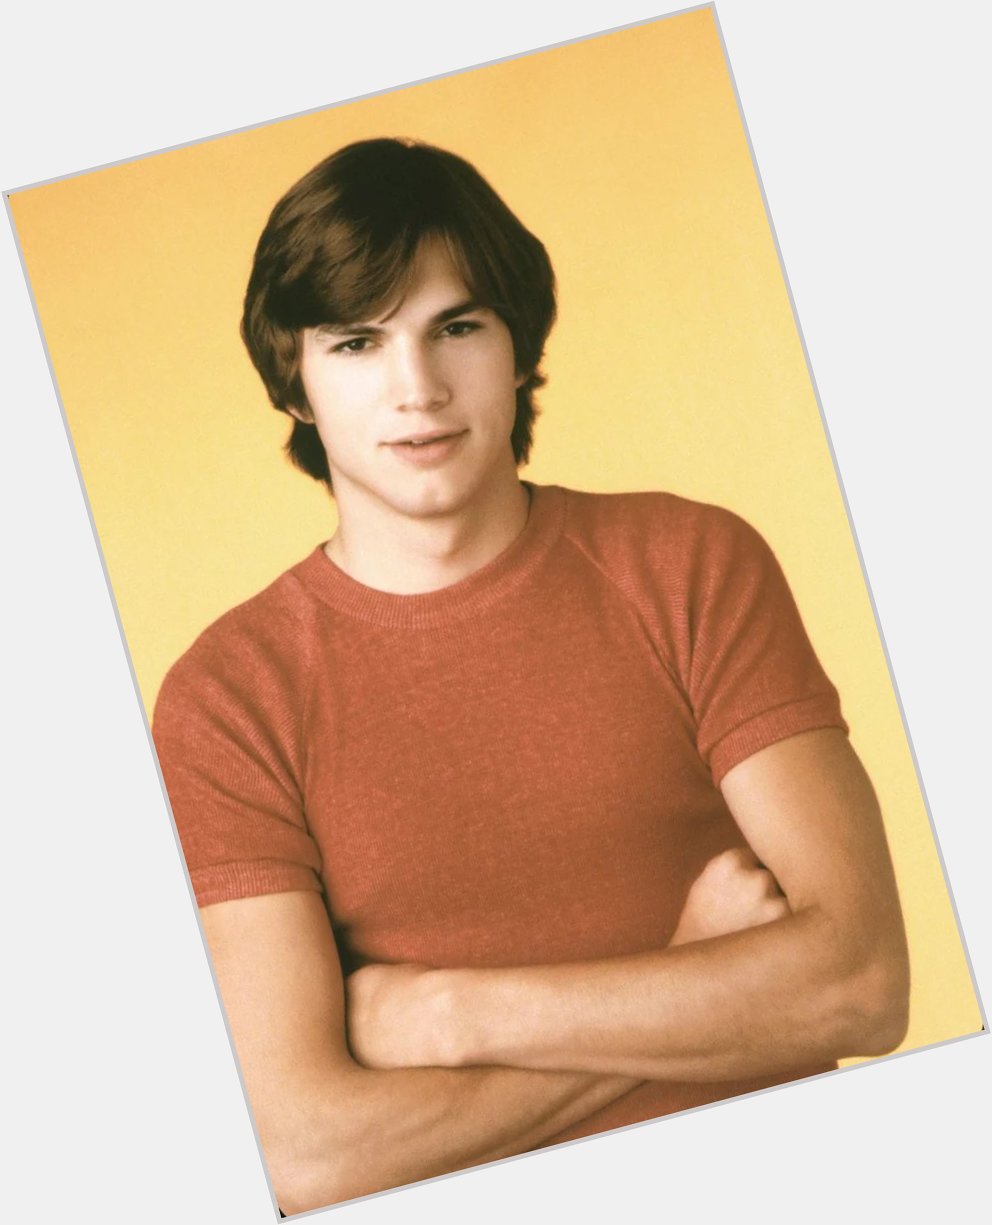 Happy birthday Ashton Kutcher! 

What was your favorite role that he played and why is it Kelso from That 70\s show? 